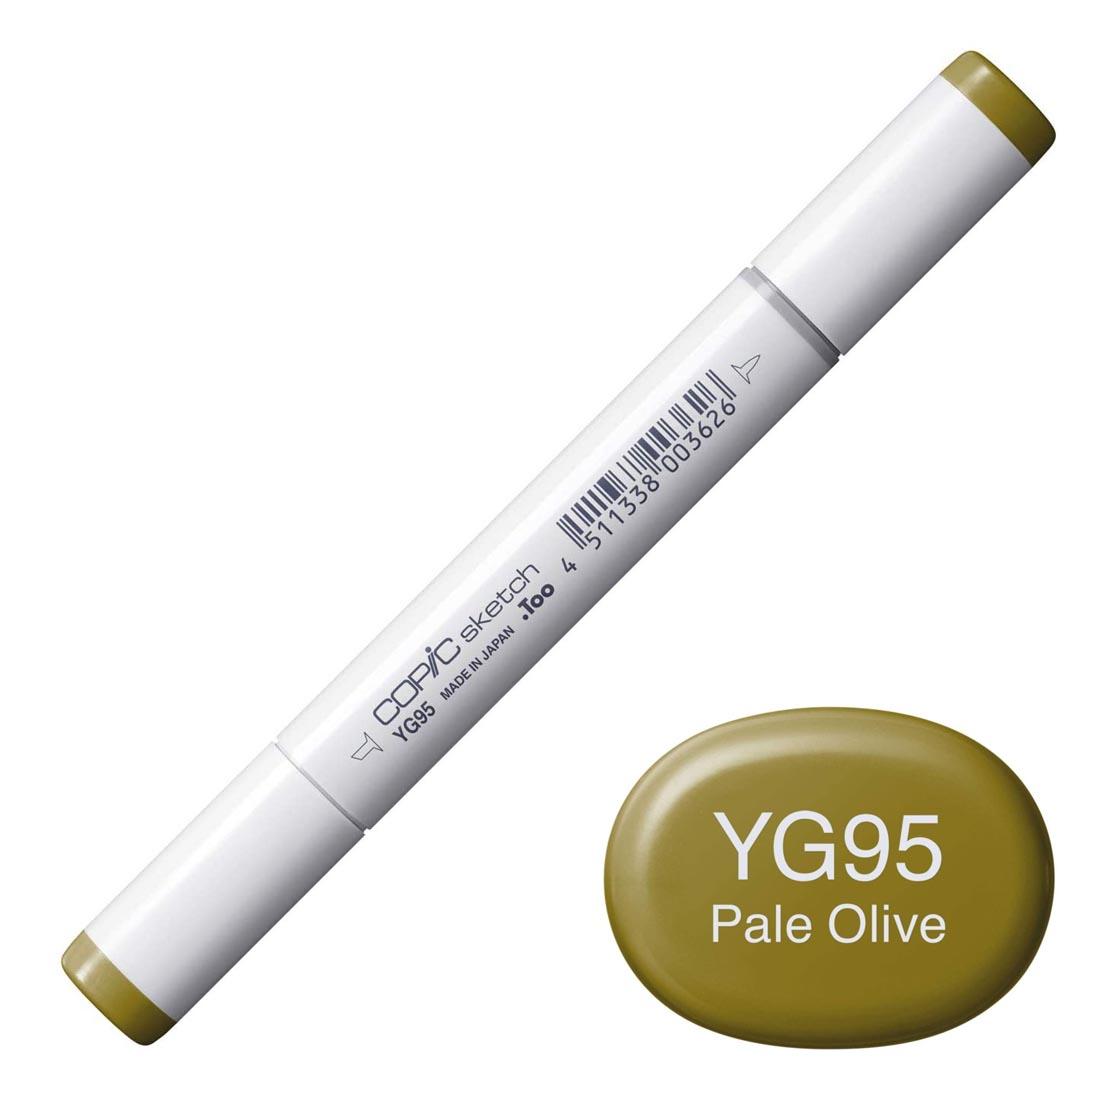 COPIC Sketch Marker with a color swatch and text of YG95 Pale Olive